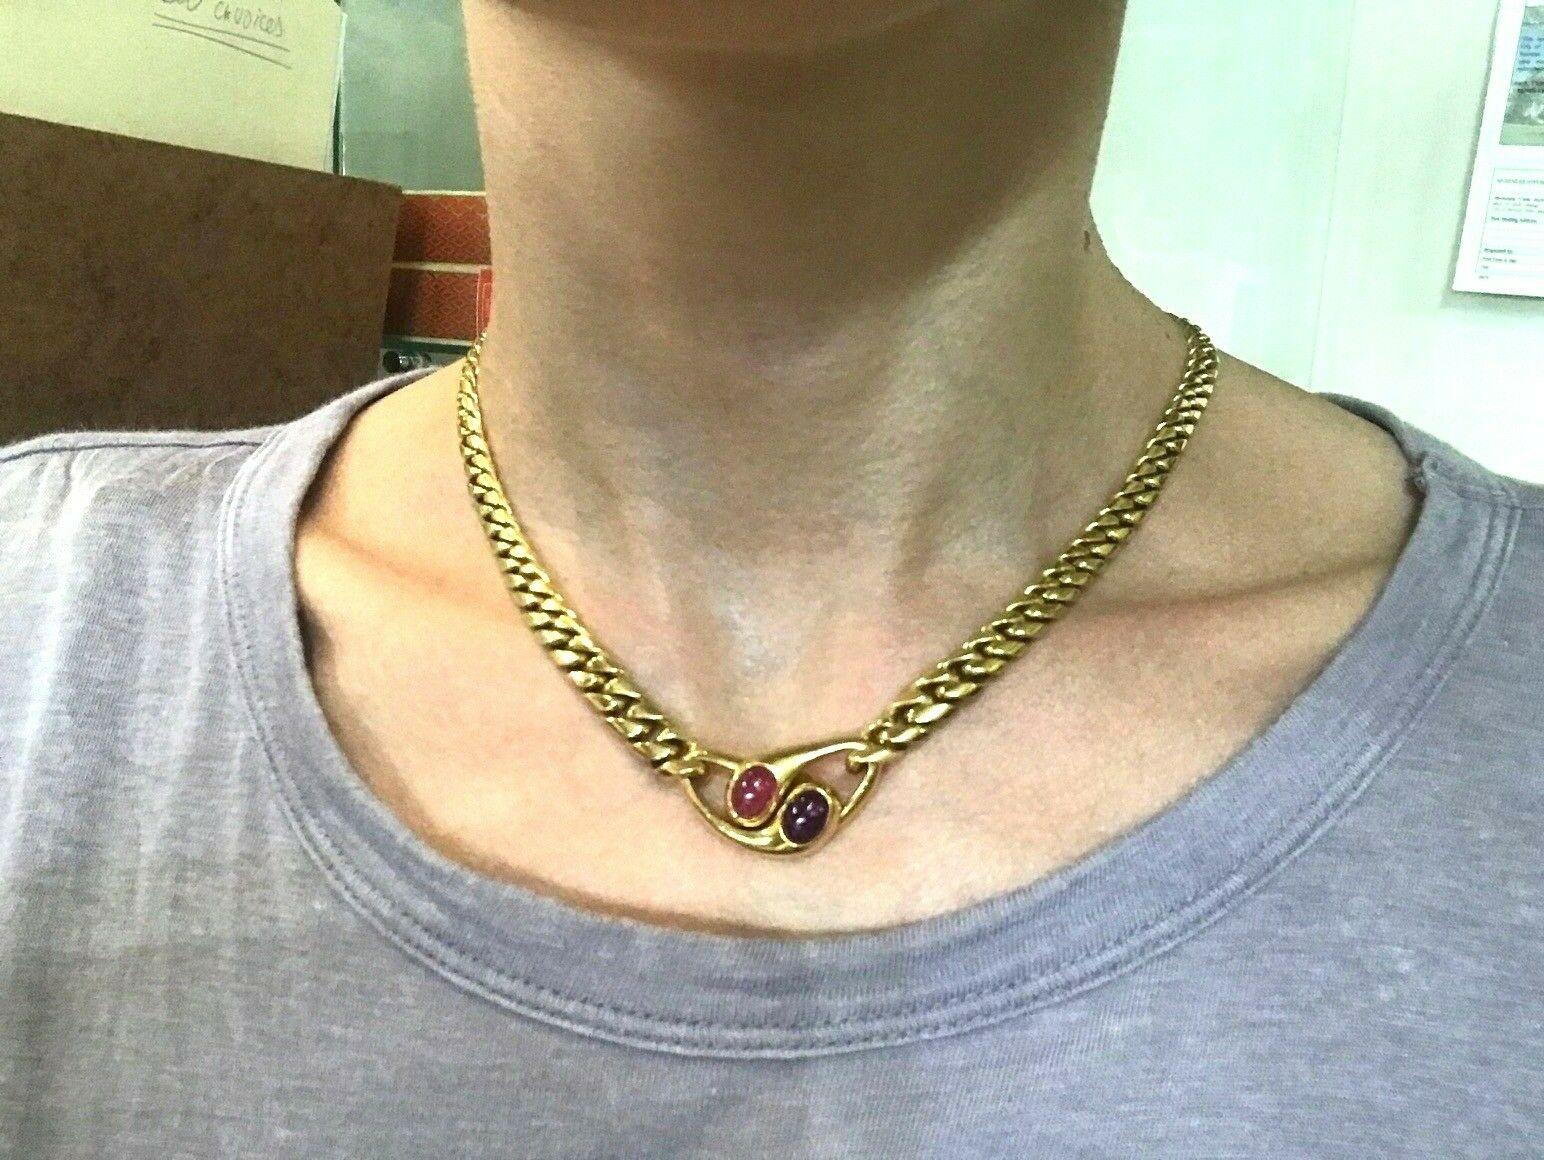 Gorgeous and wearable vintage Bvlgari necklace made of 18k yellow gold featuring cabochon amethyst and pink tourmaline. Timeless signature Bvlgari design at its best. 
Stamped with the Bulgari maker's mark, hallmarks for 18k gold and a serial